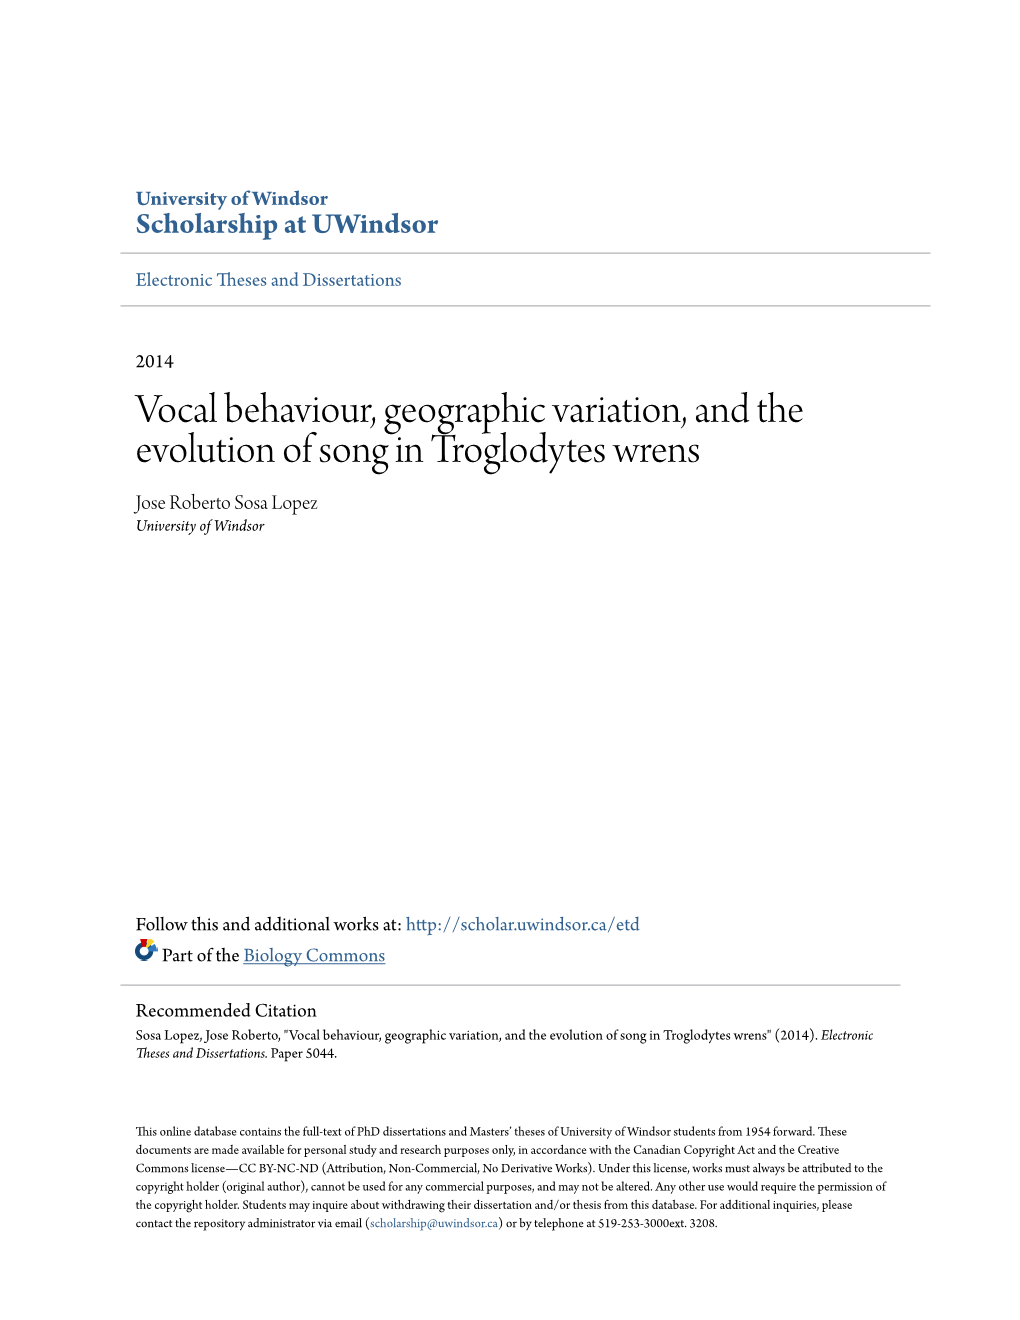 Vocal Behaviour, Geographic Variation, and the Evolution of Song in Troglodytes Wrens Jose Roberto Sosa Lopez University of Windsor